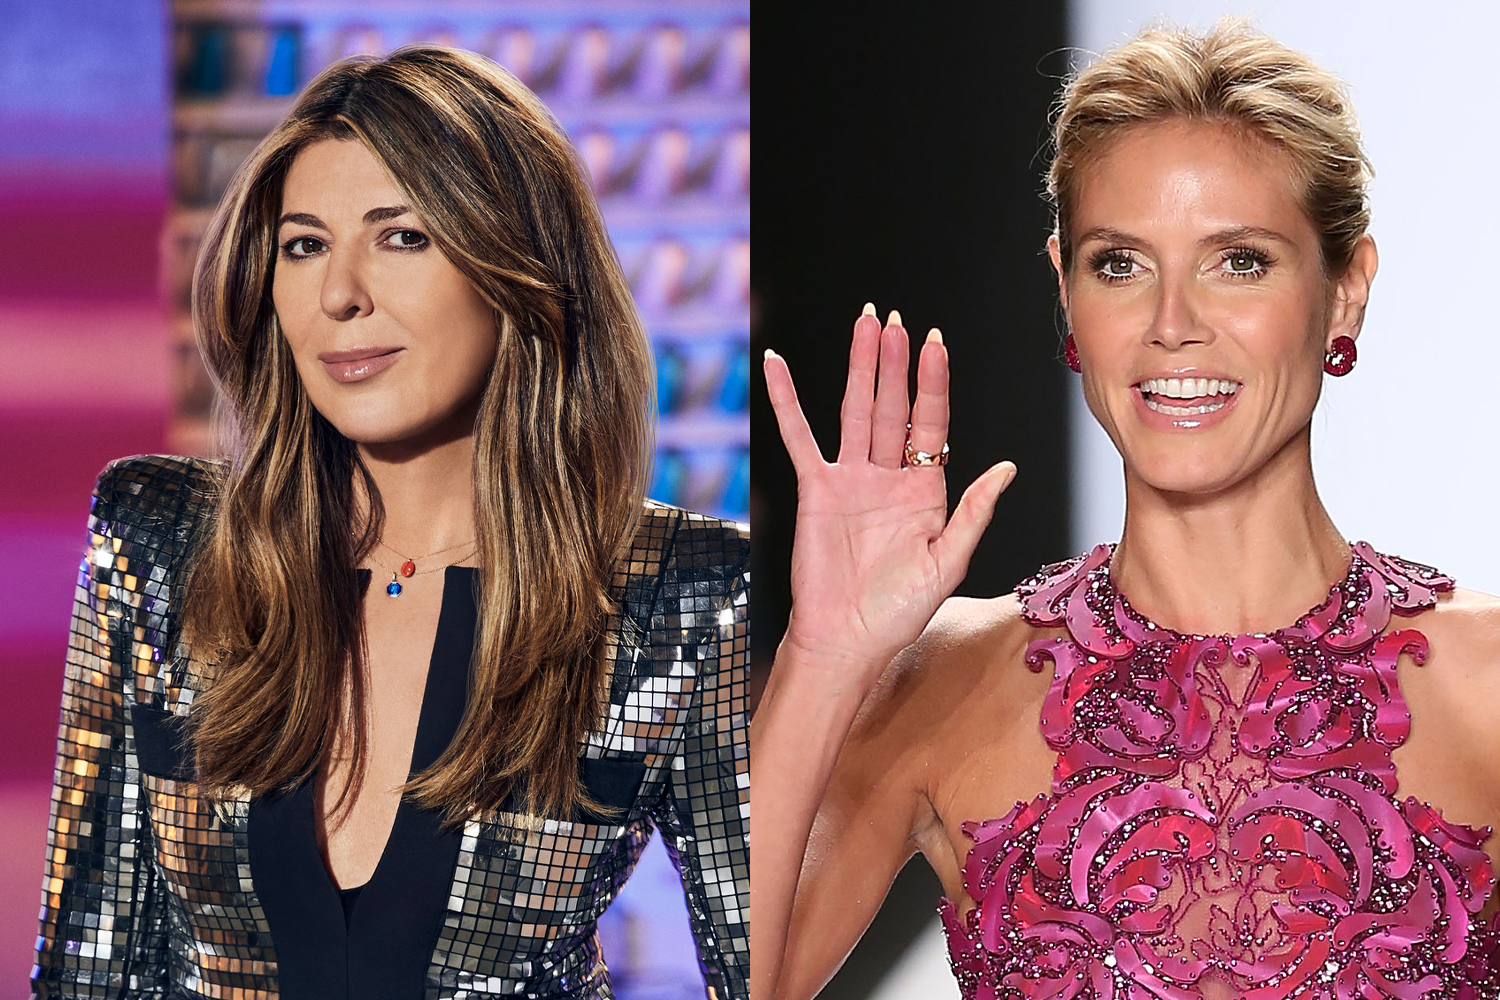 ‘Project Runway’ Judge Nina Garcia Shares Reunion Photo With Heidi Klum and Fans Are Living for It